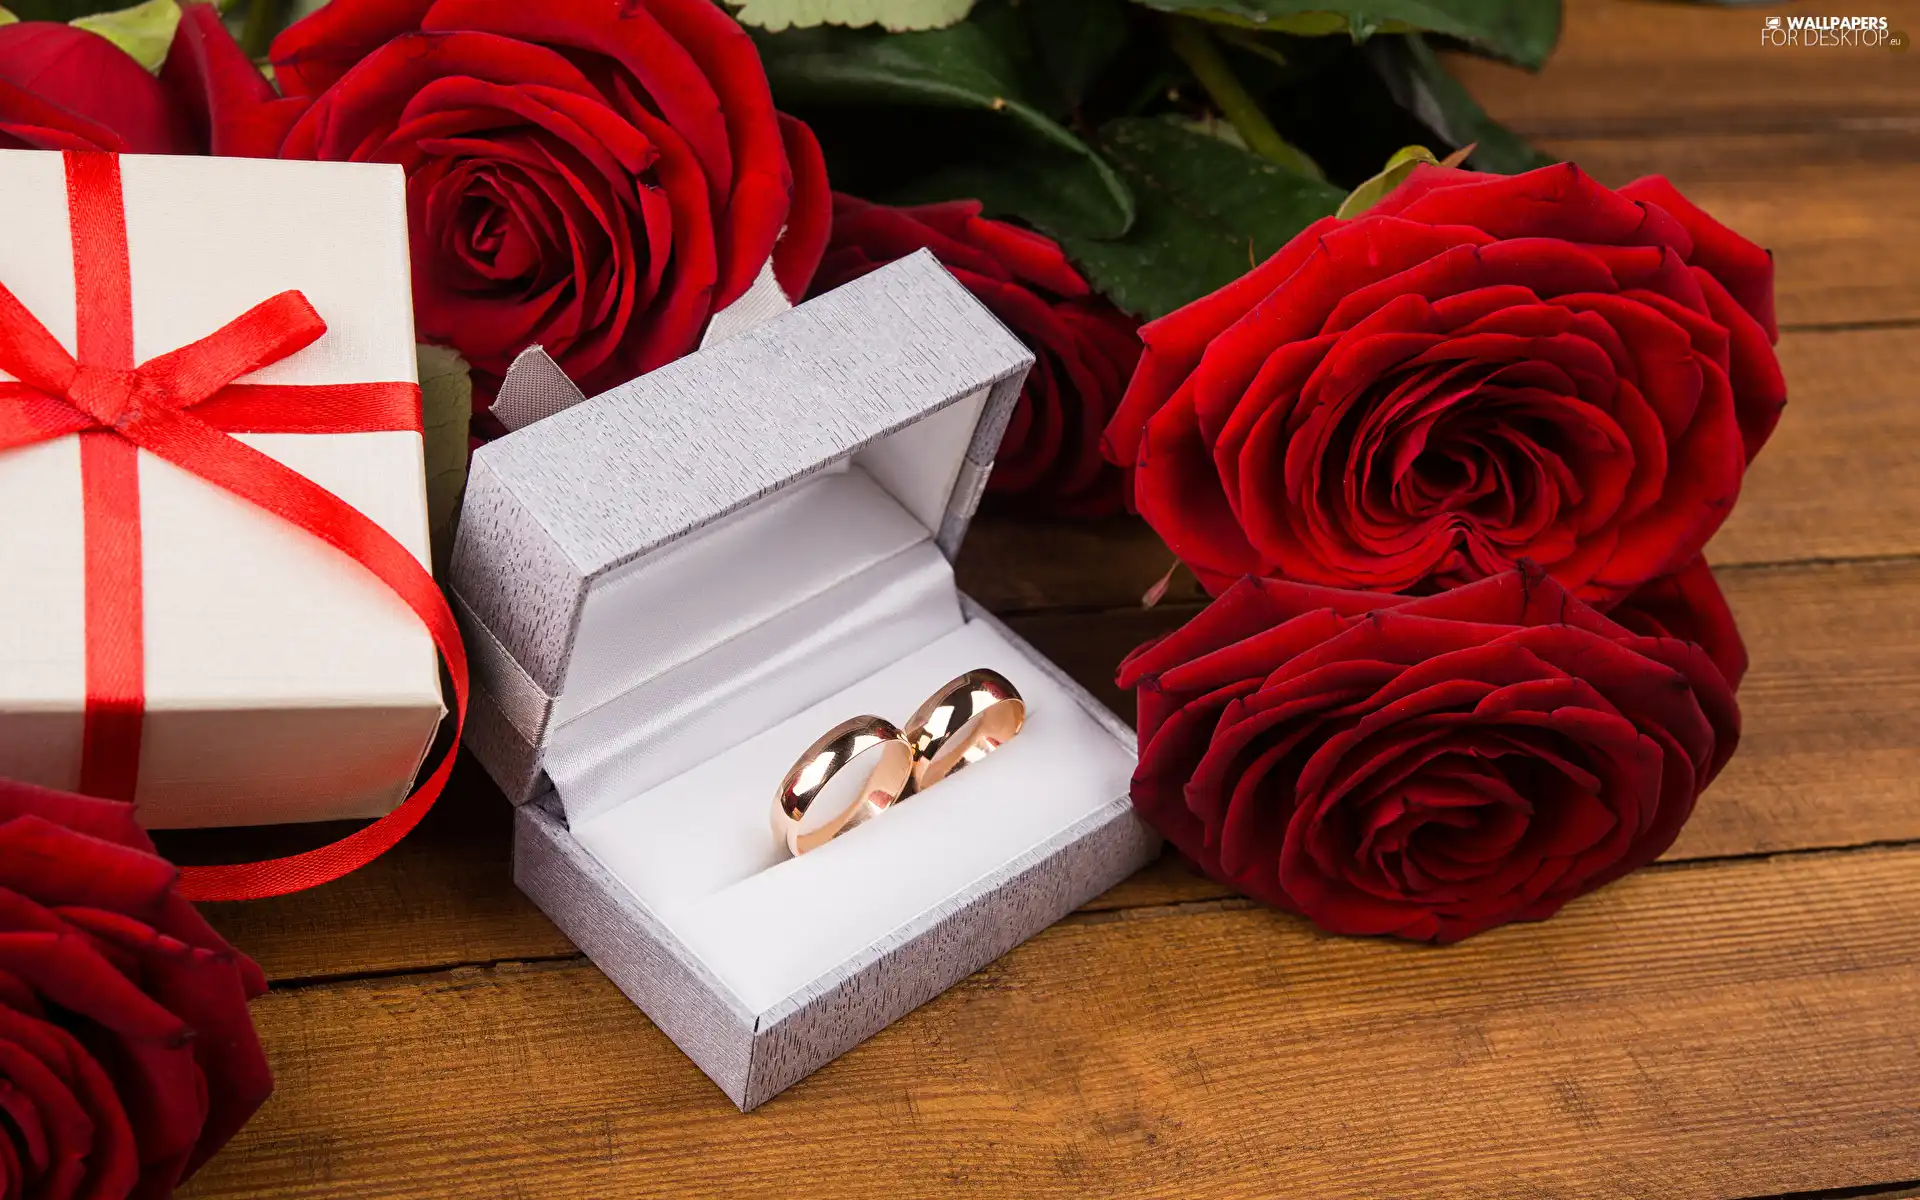 roses, Flowers, Red, bouquet, Present, boarding, rings, Box, marriage